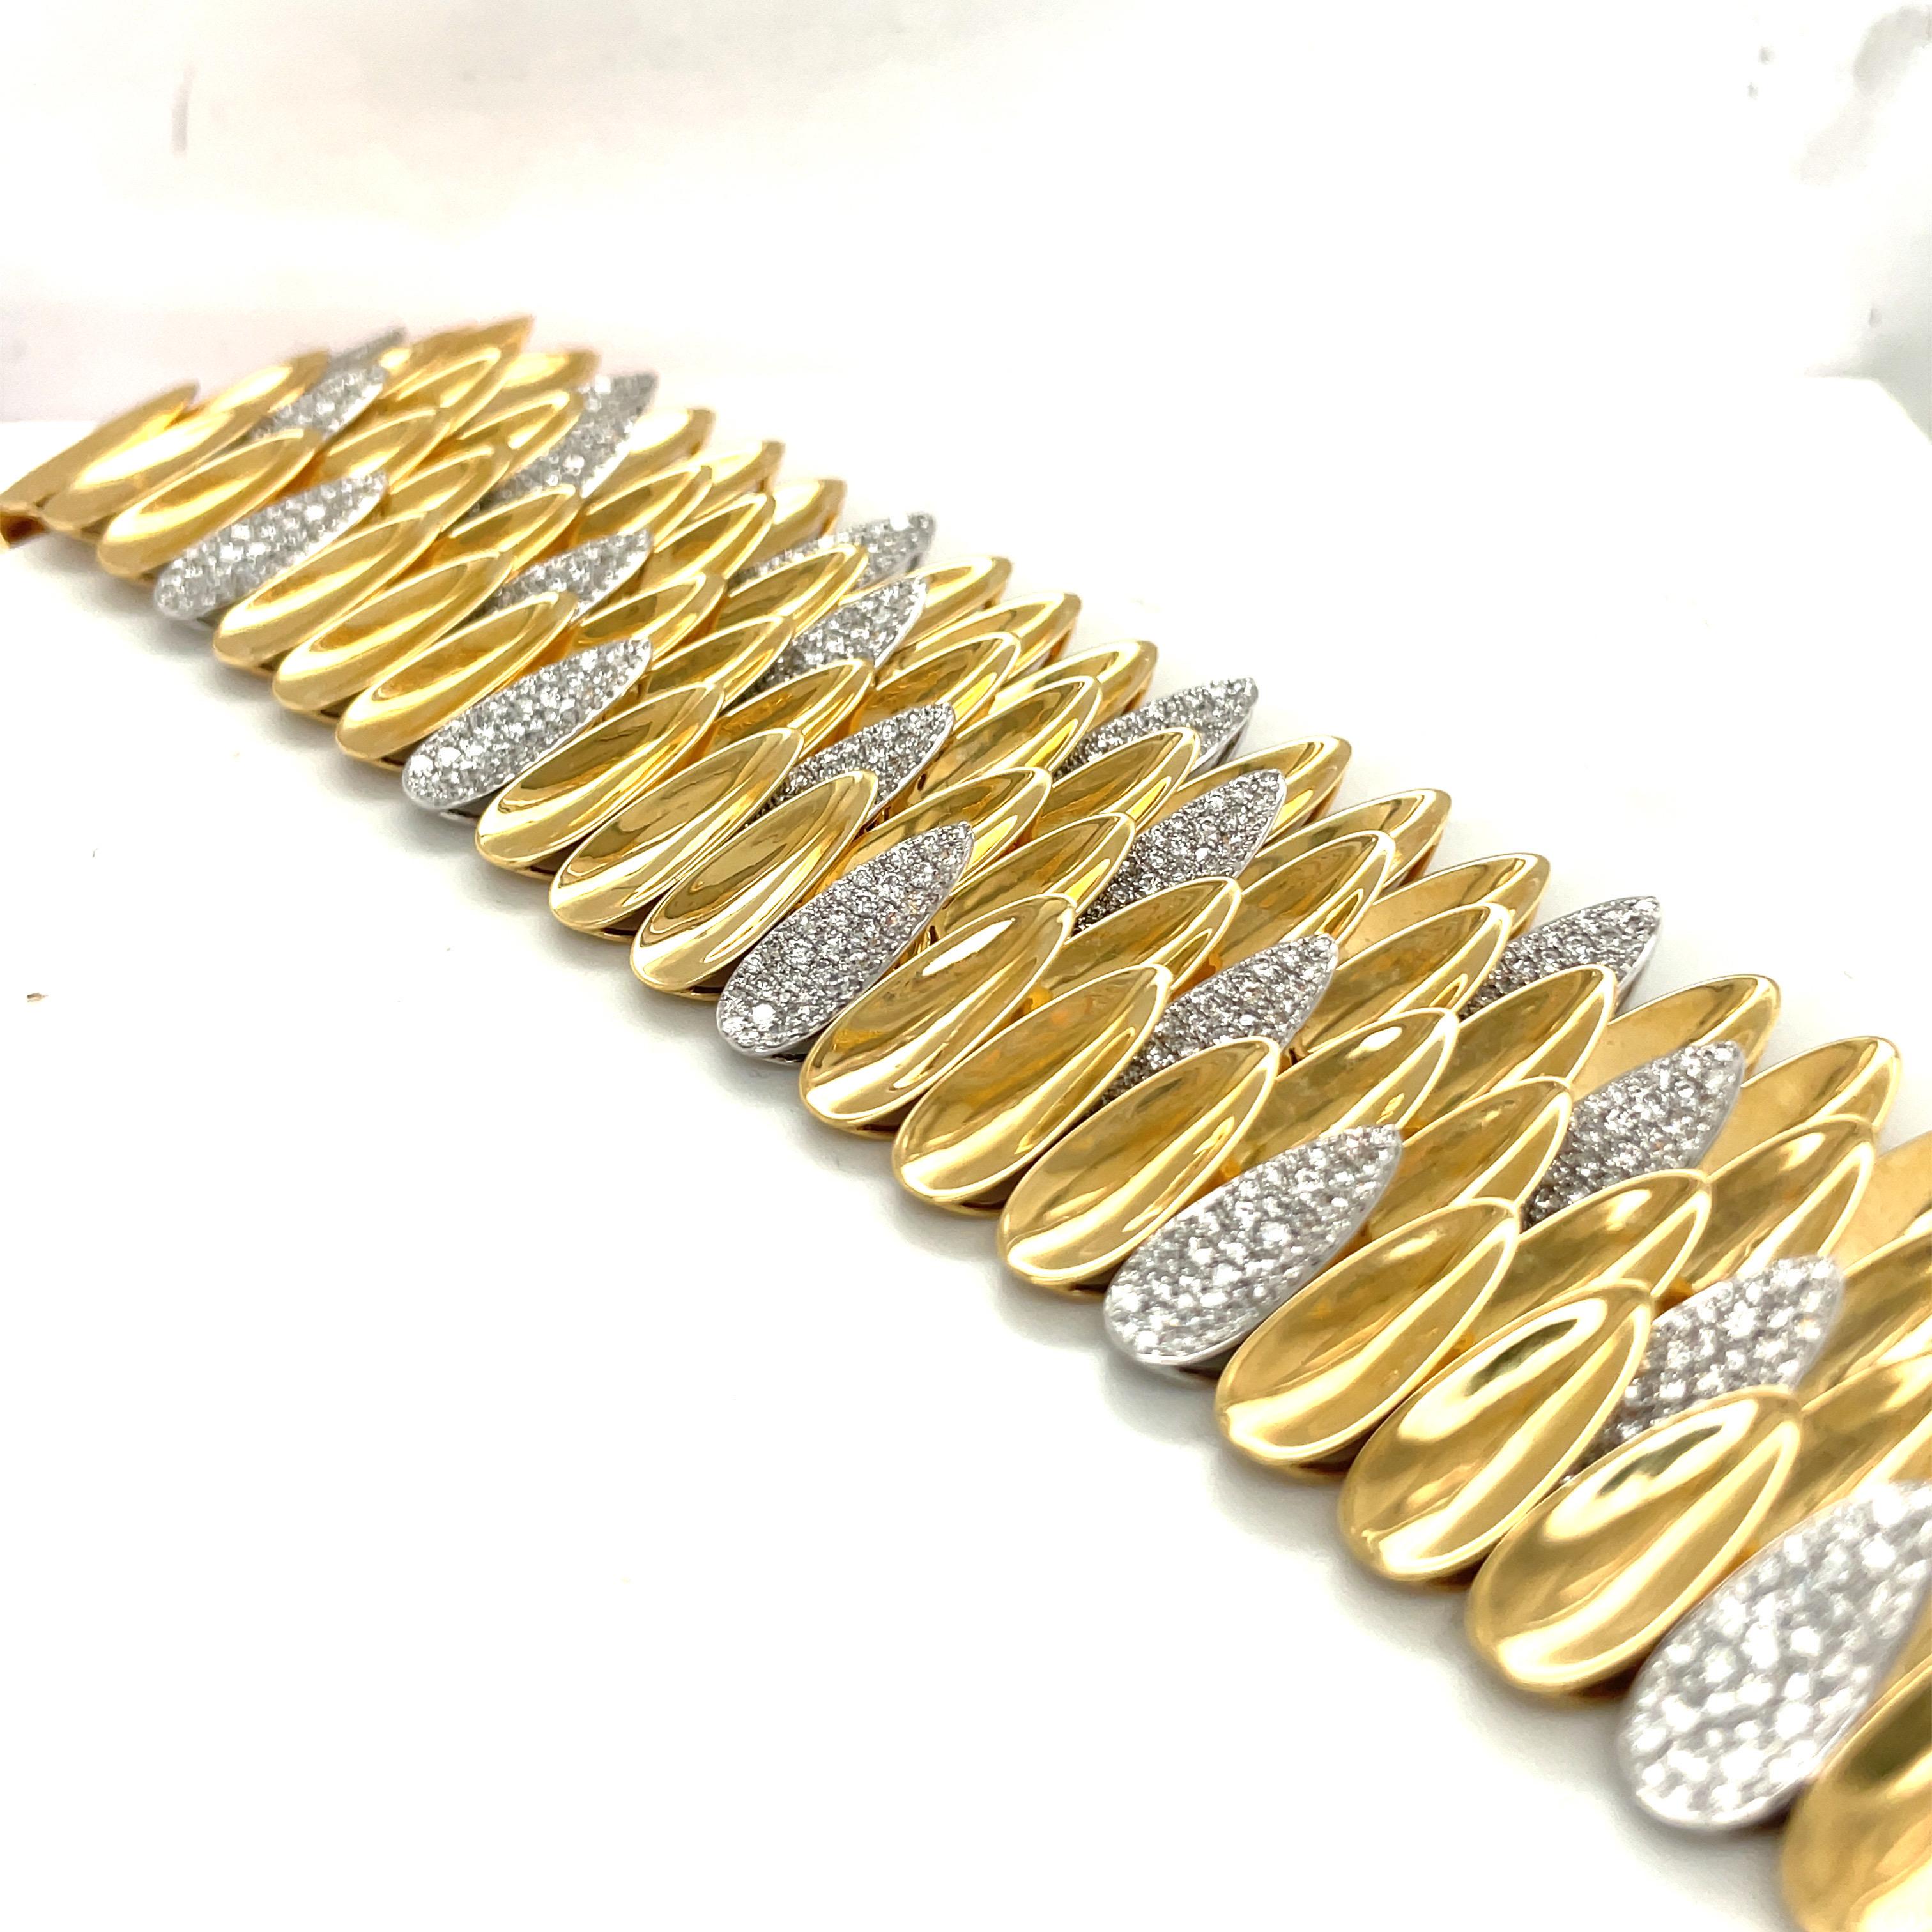 Sutra 18KT Yellow & White Gold 11.82 Ct Diamond Lotus Leaf Cuff Bracelet For Sale 2